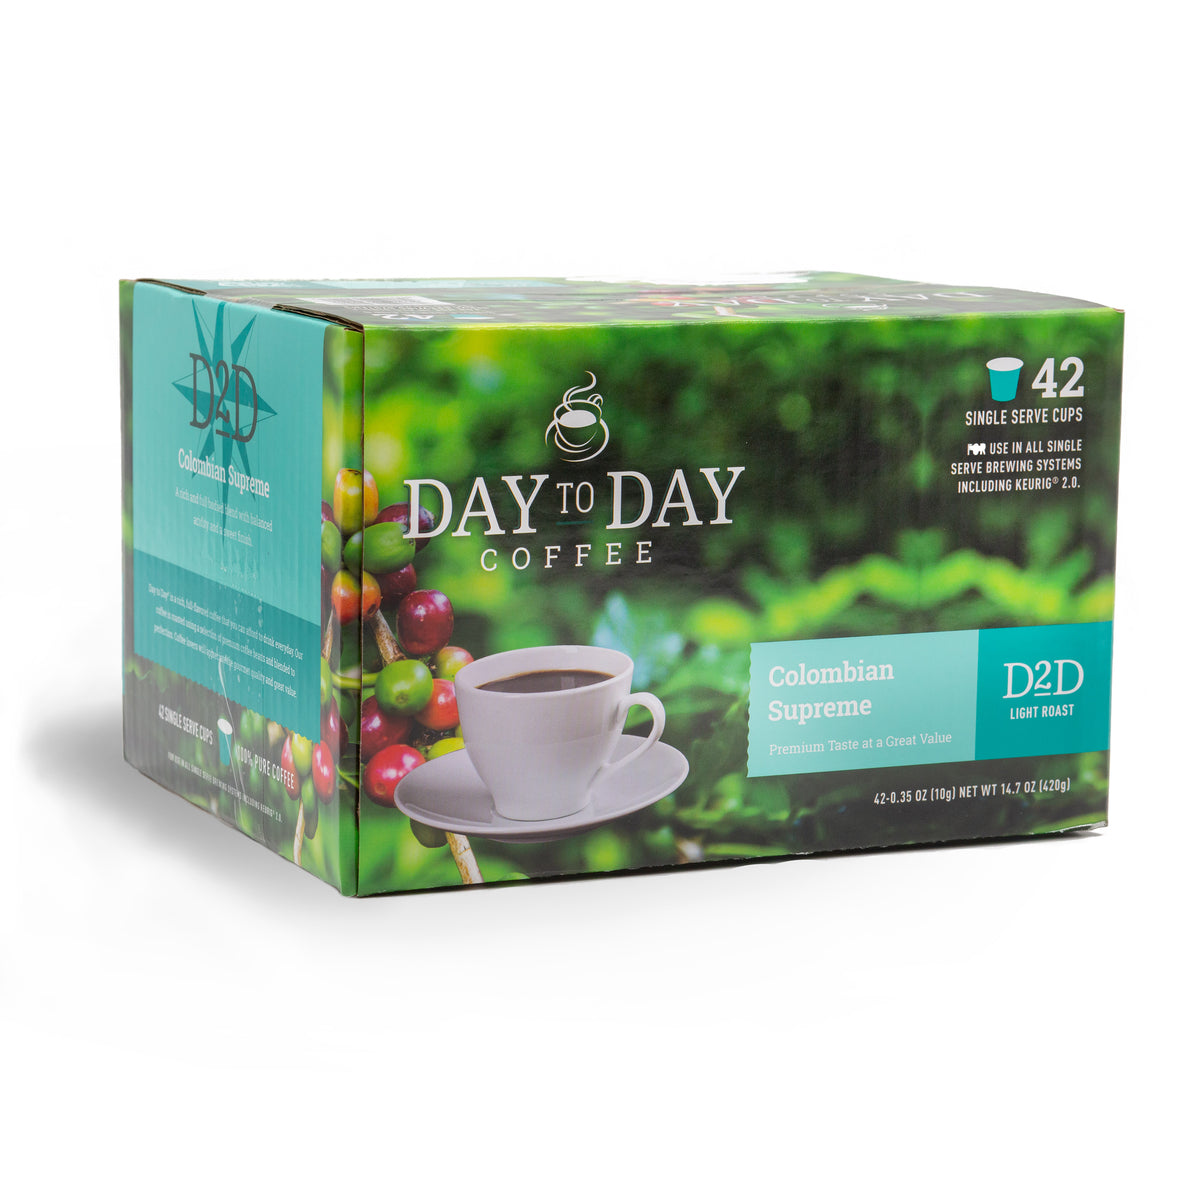 Day to day coffee 42 count colombian supreme light roast coffee pods for single serve coffee brewer